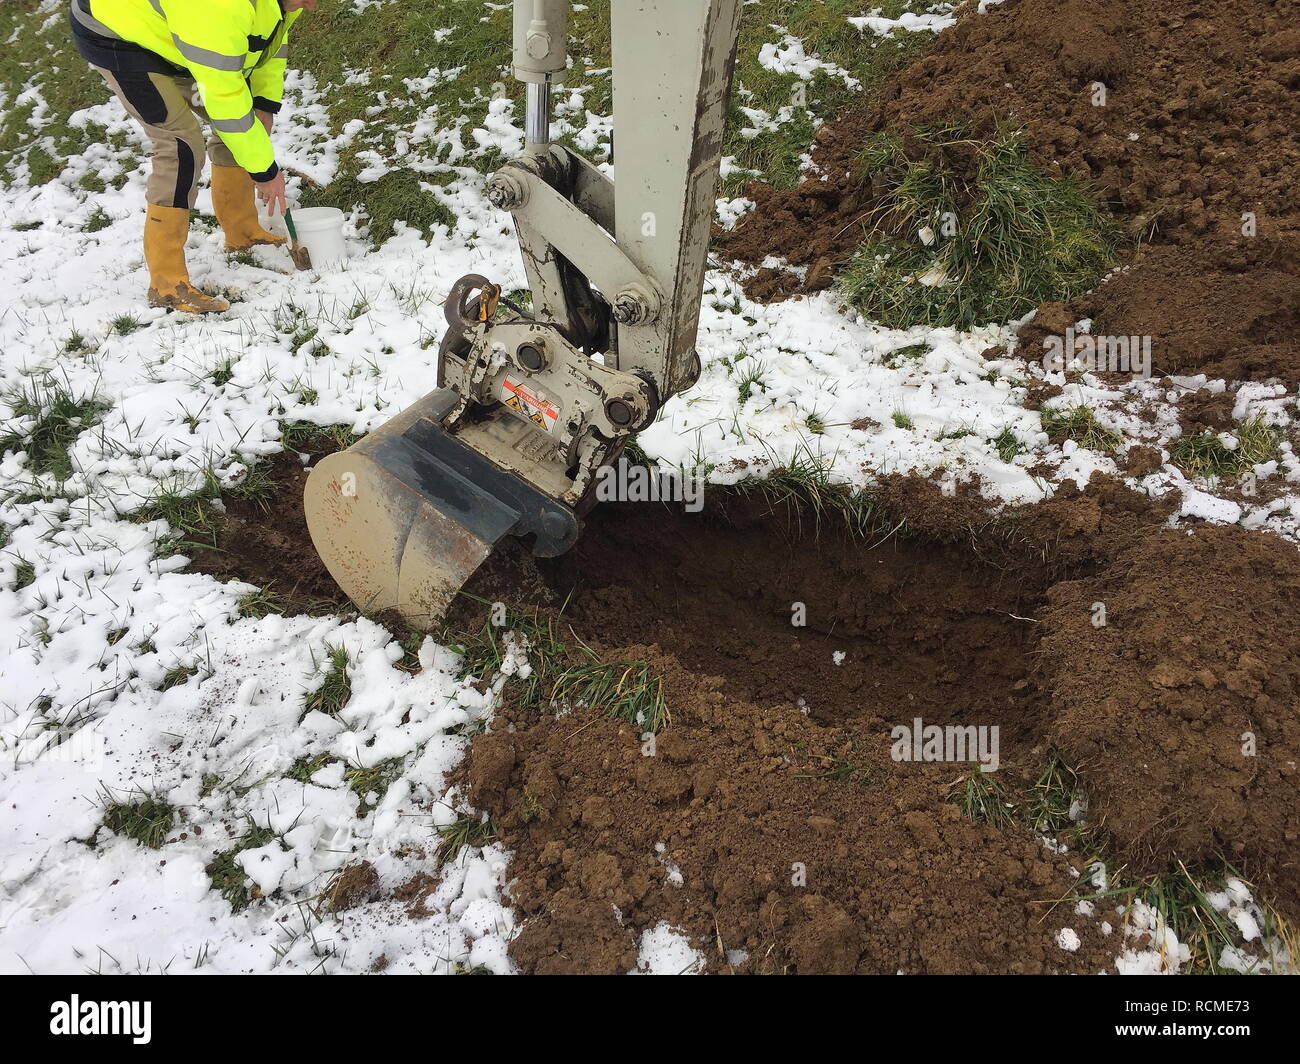 Excavator shovel digs into a ground covered with snow. Stock Photo